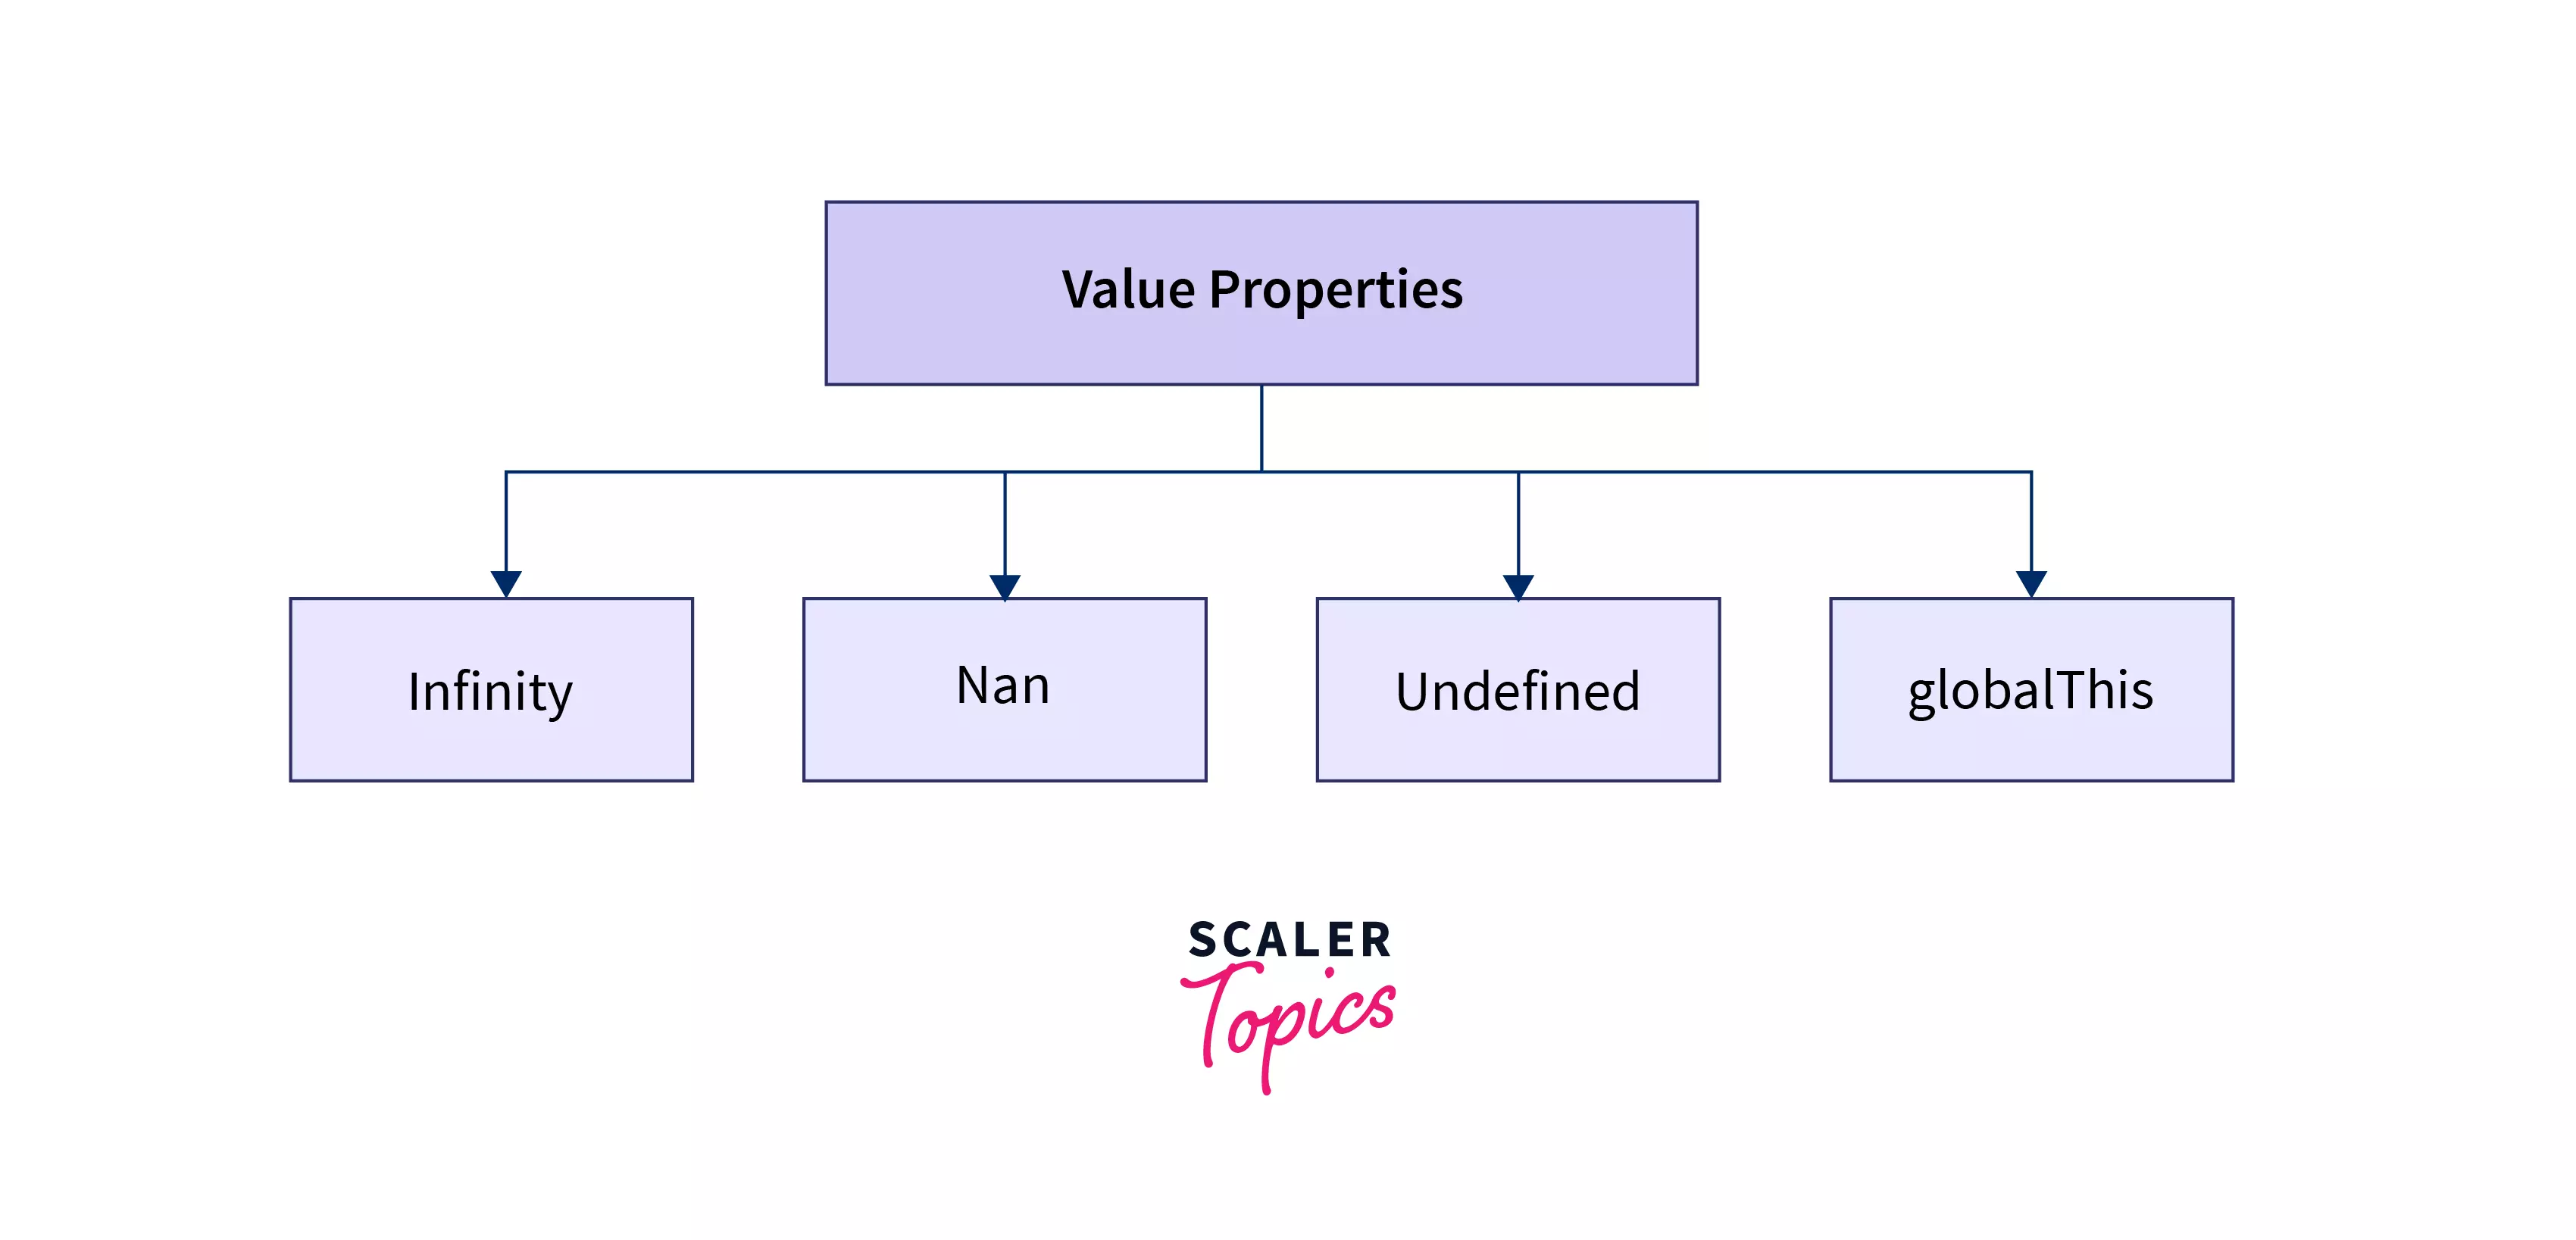 Value Properties builts in objects